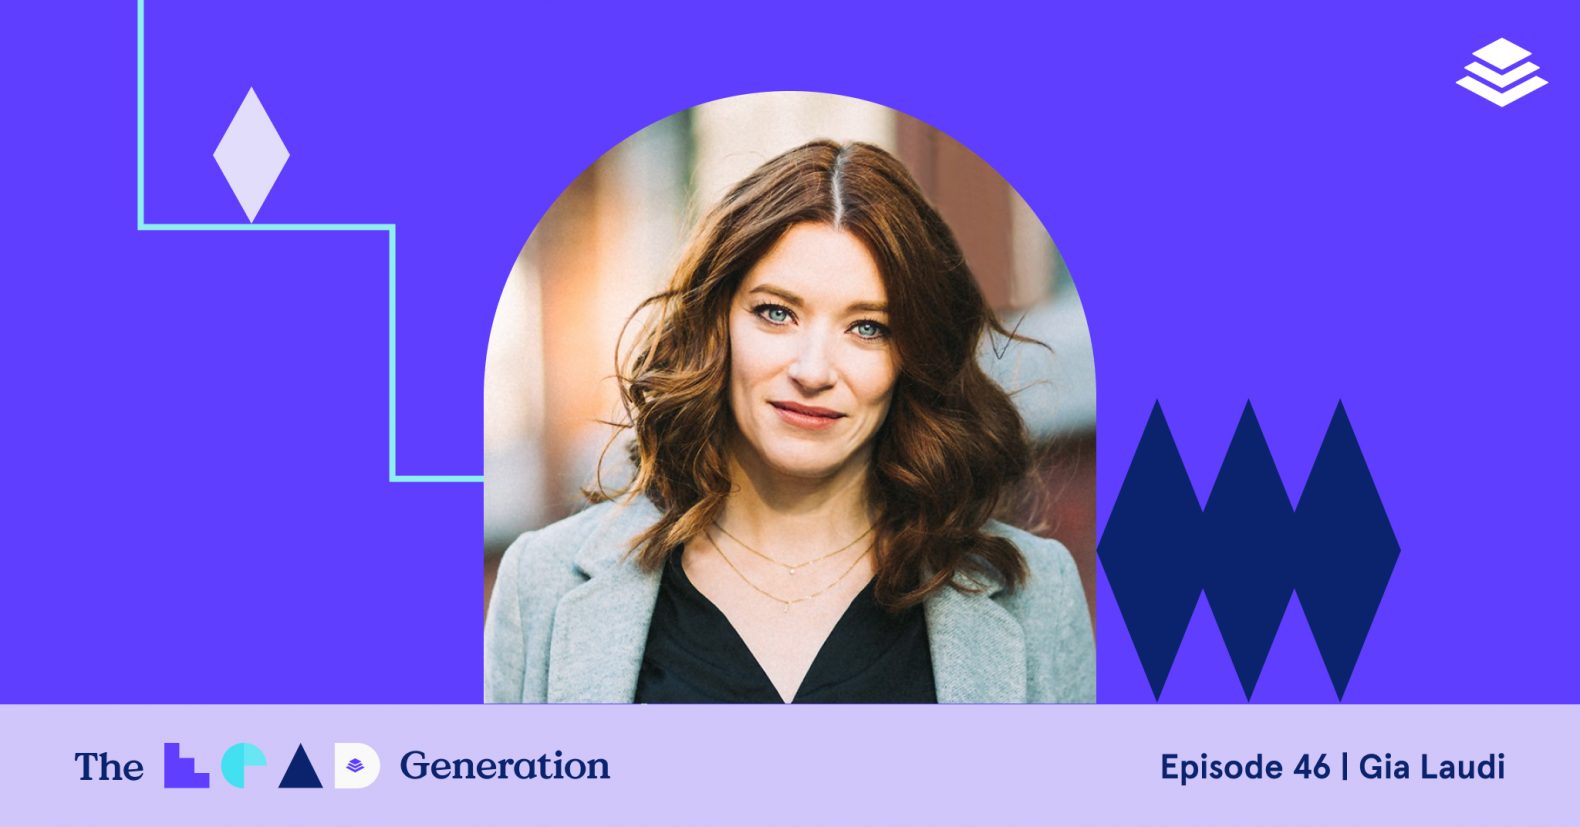 The Lead Generation Podcast Episode 46: Gia Laudi